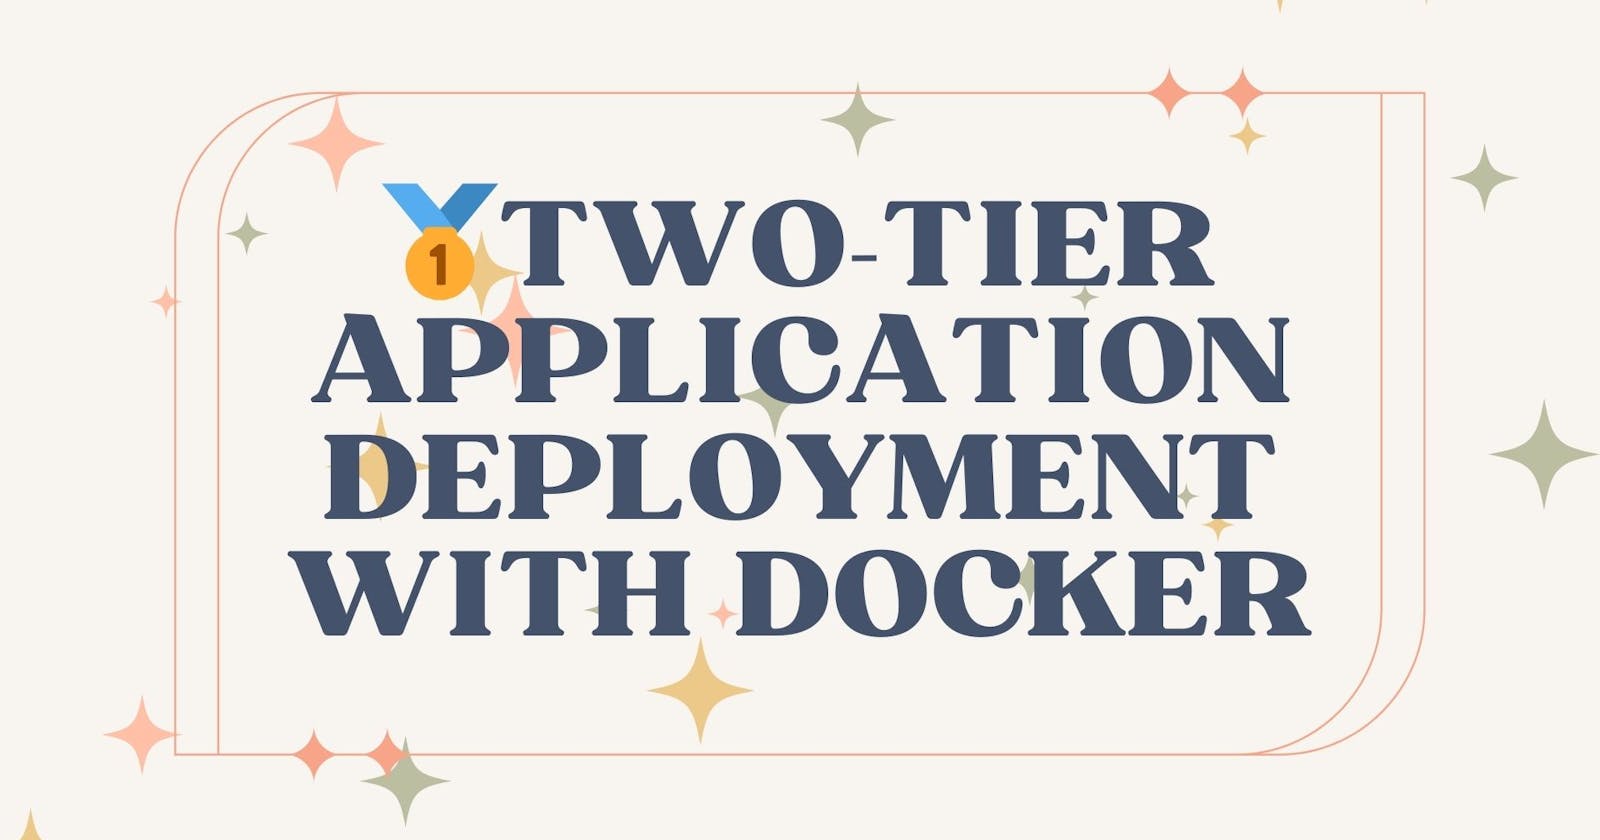 🥇Two-Tier Application Deployment with Docker